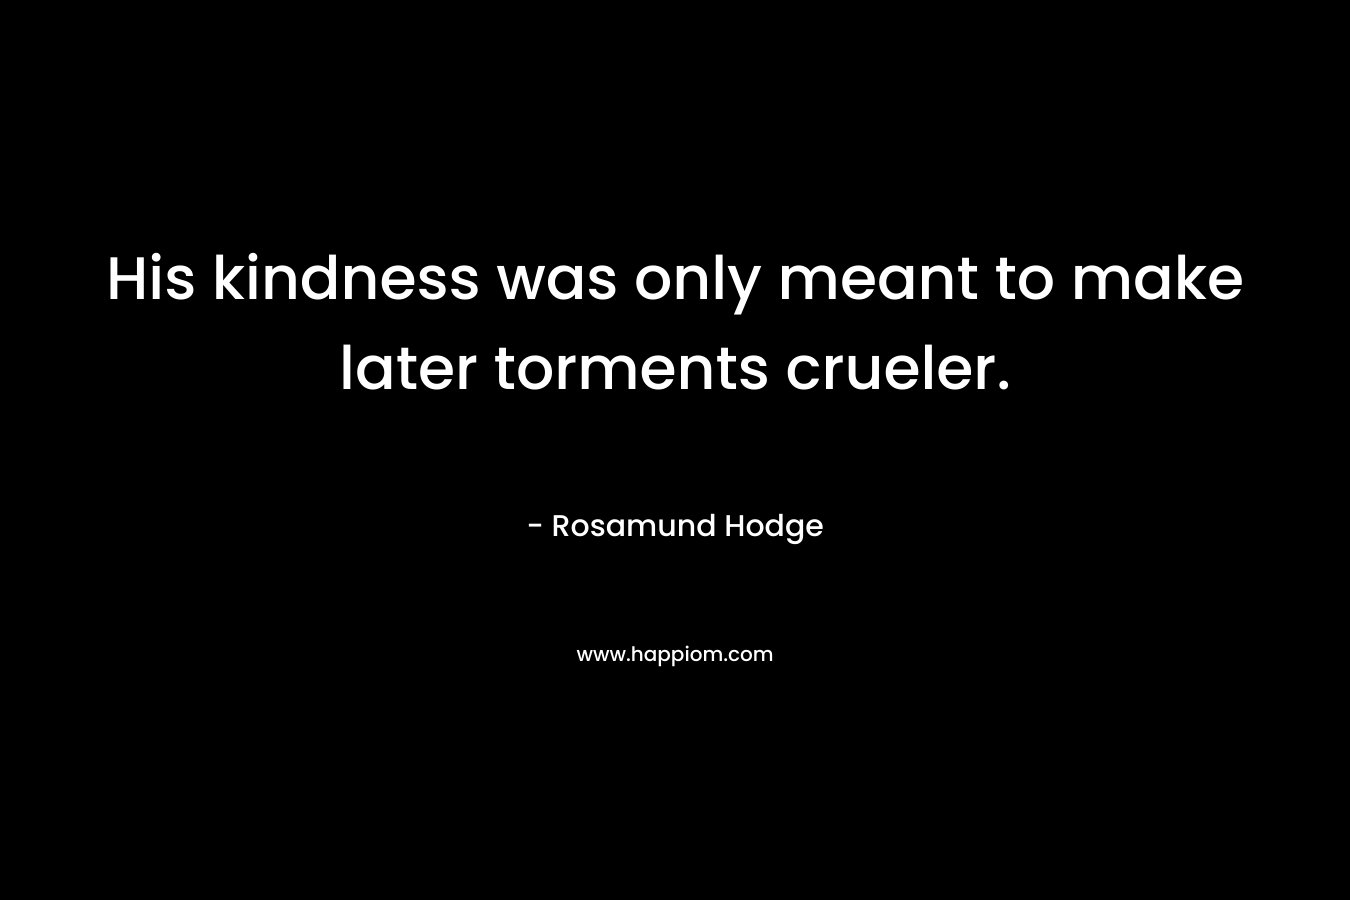 His kindness was only meant to make later torments crueler. – Rosamund Hodge